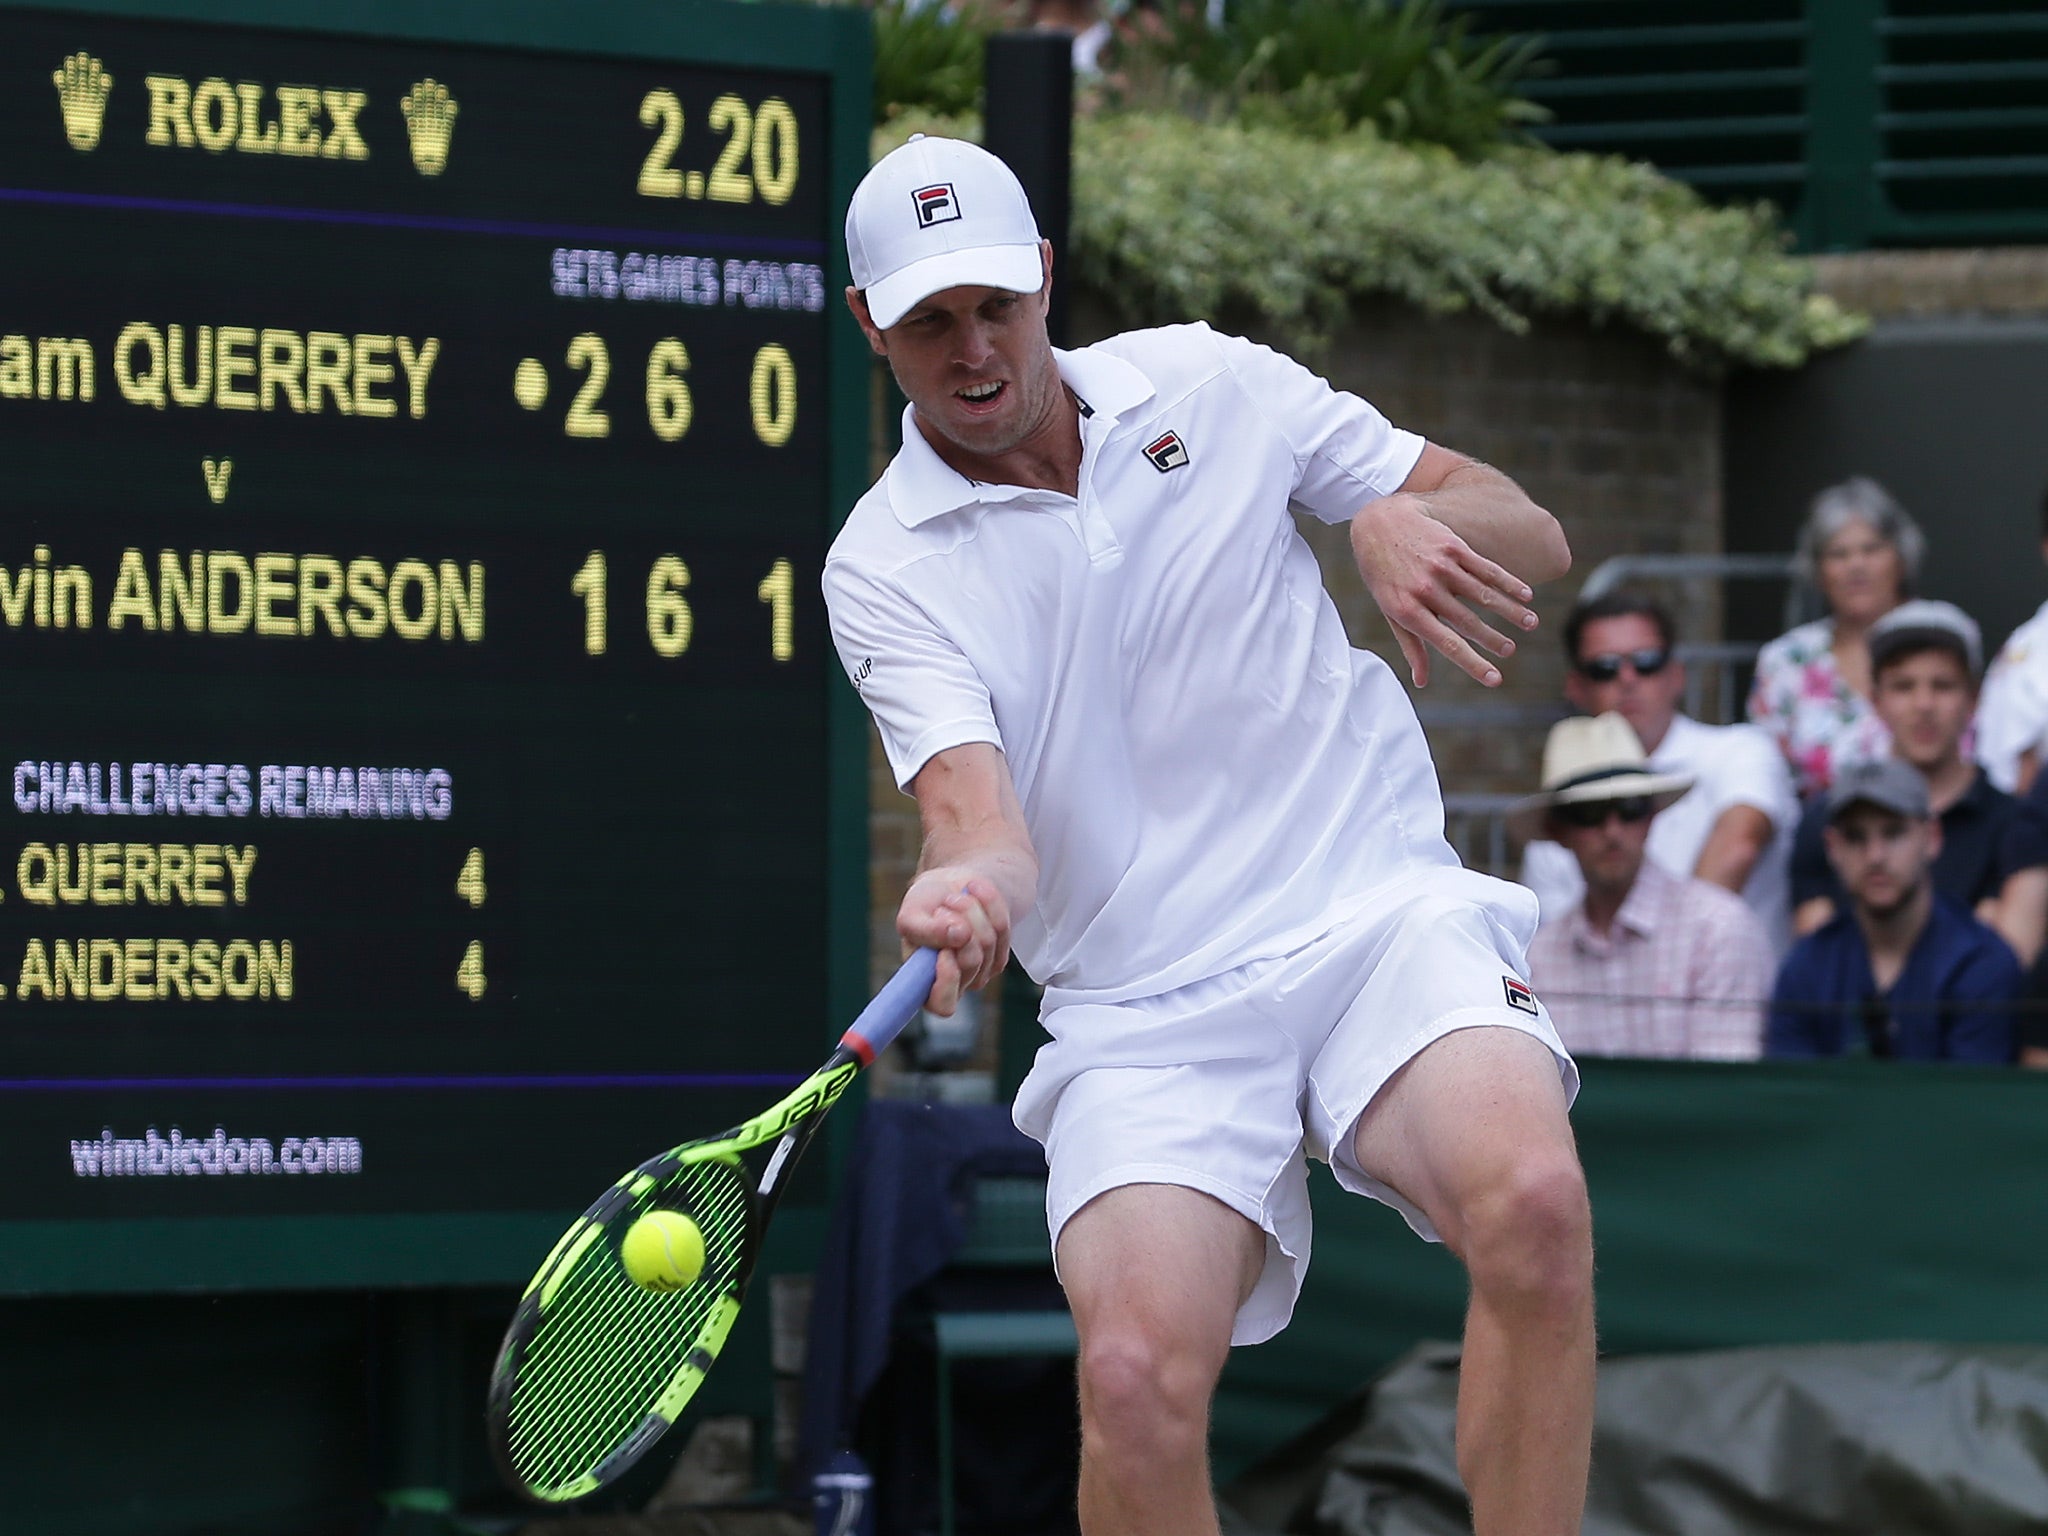 Querrey's big game matches his imposing frame